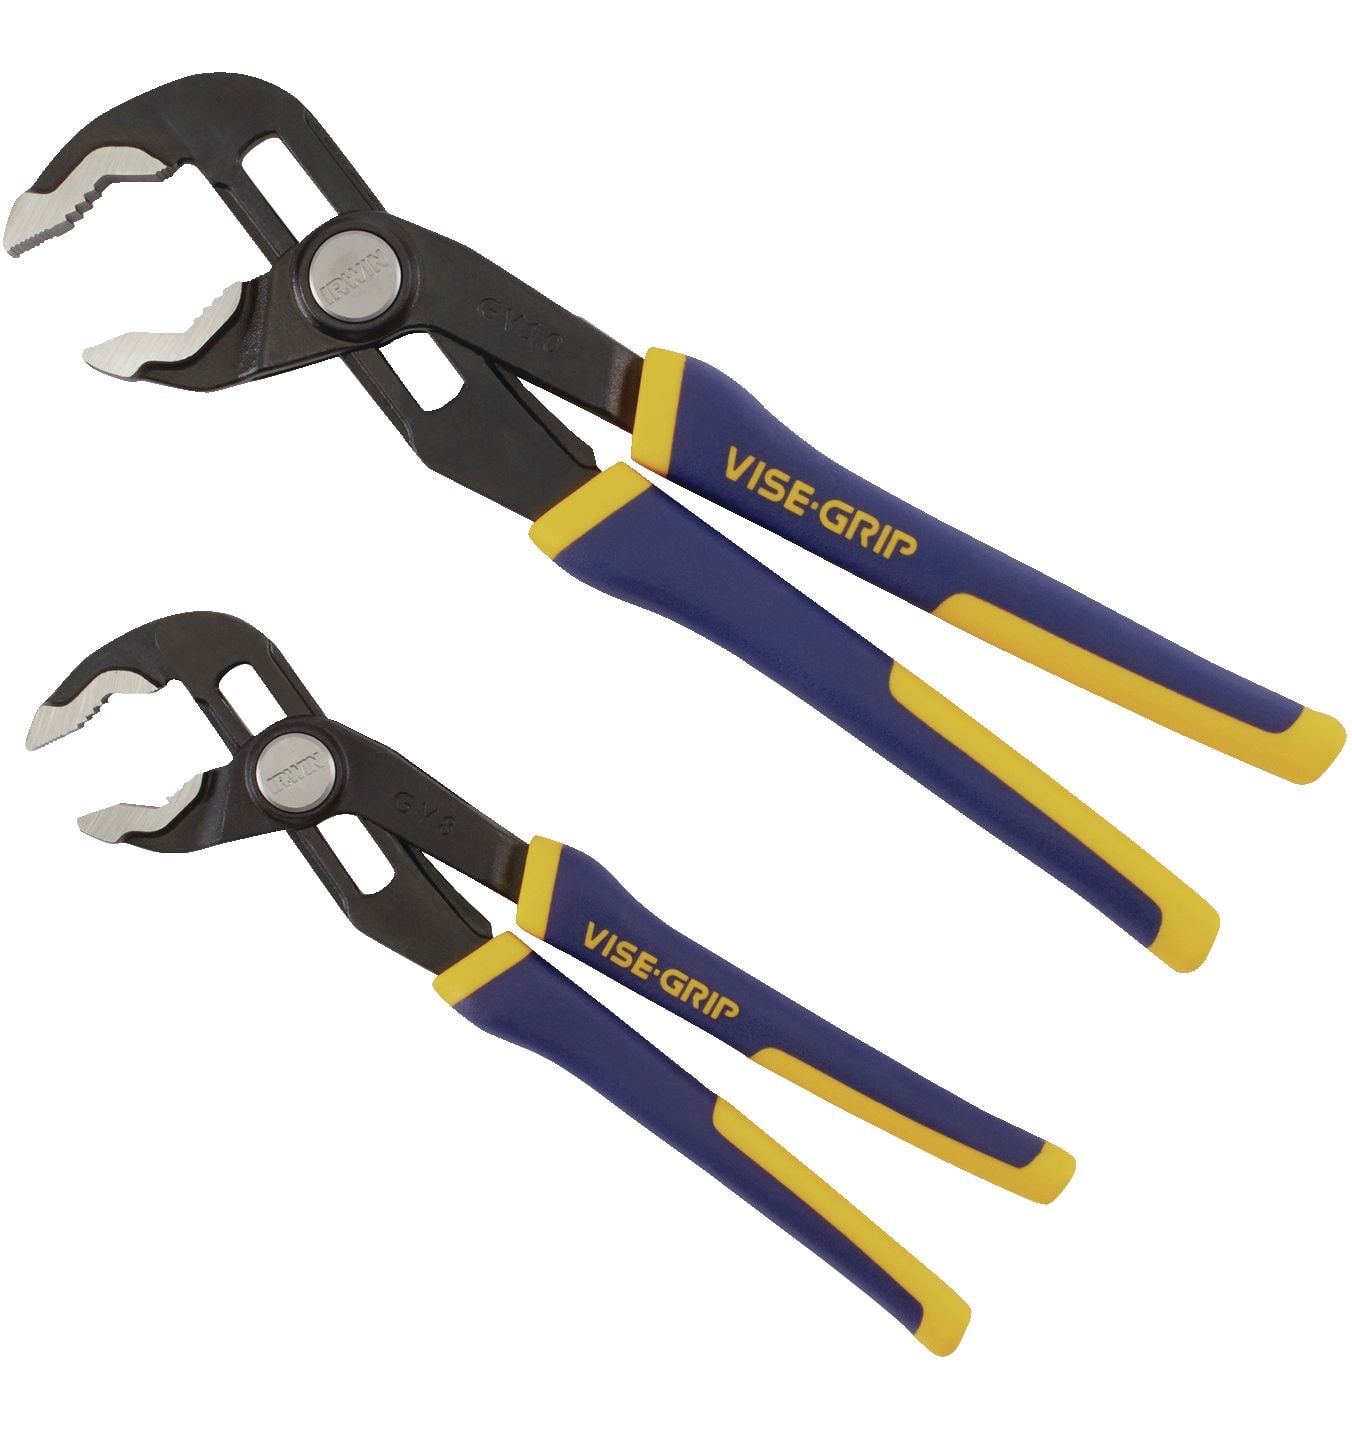 IRWIN 2078709 Vise-Grip V Jaw GrooveLock Pliers Set, ProTouch